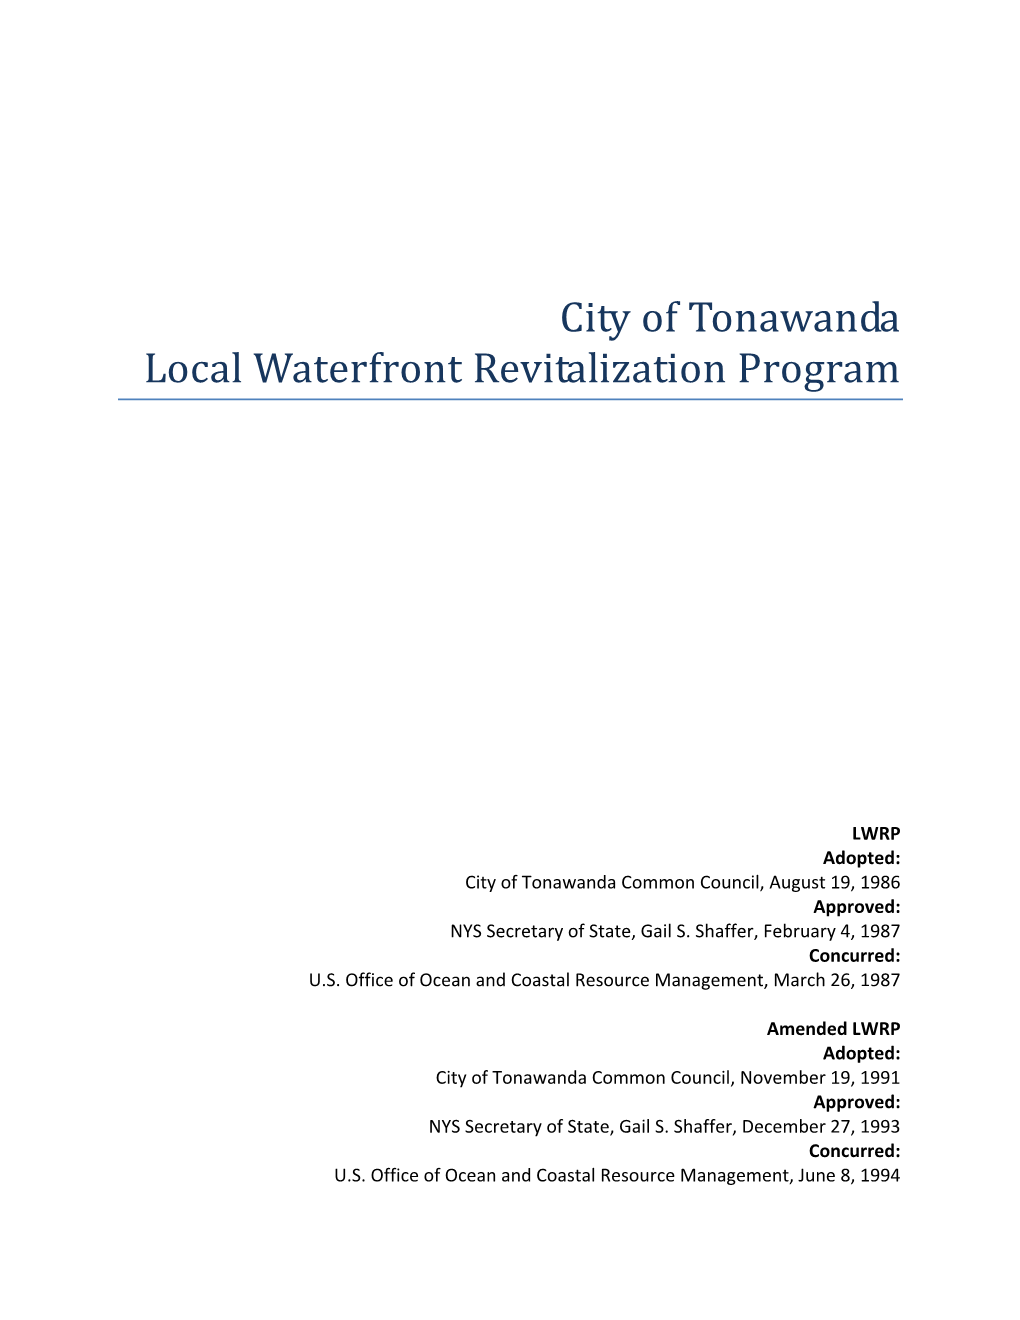 City of Tonawanda LWRP Into the NYS Emp As a Routine Program Implementation Change